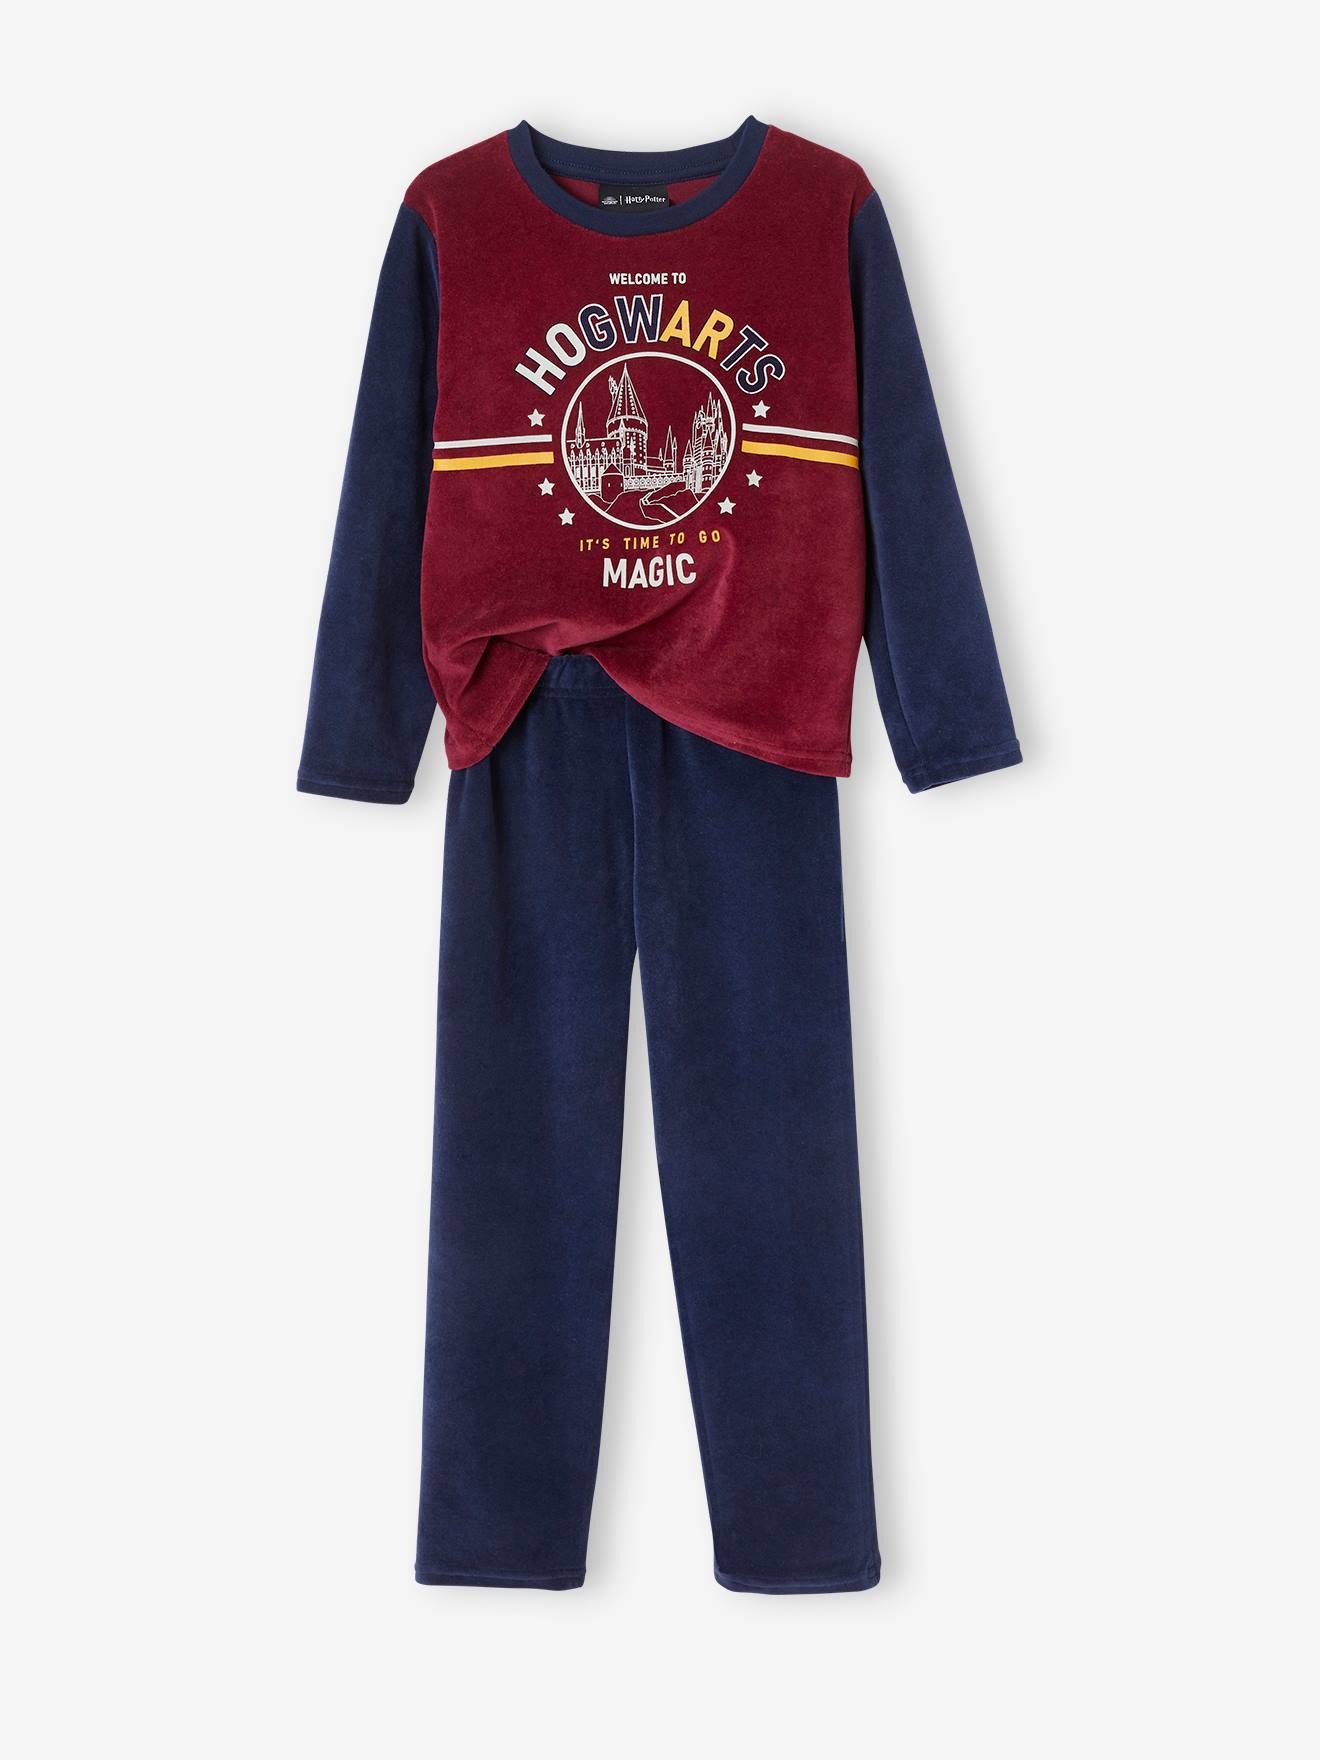 Harry Potter(r) Pyjamas in Velour for Boys blue dark solid with design